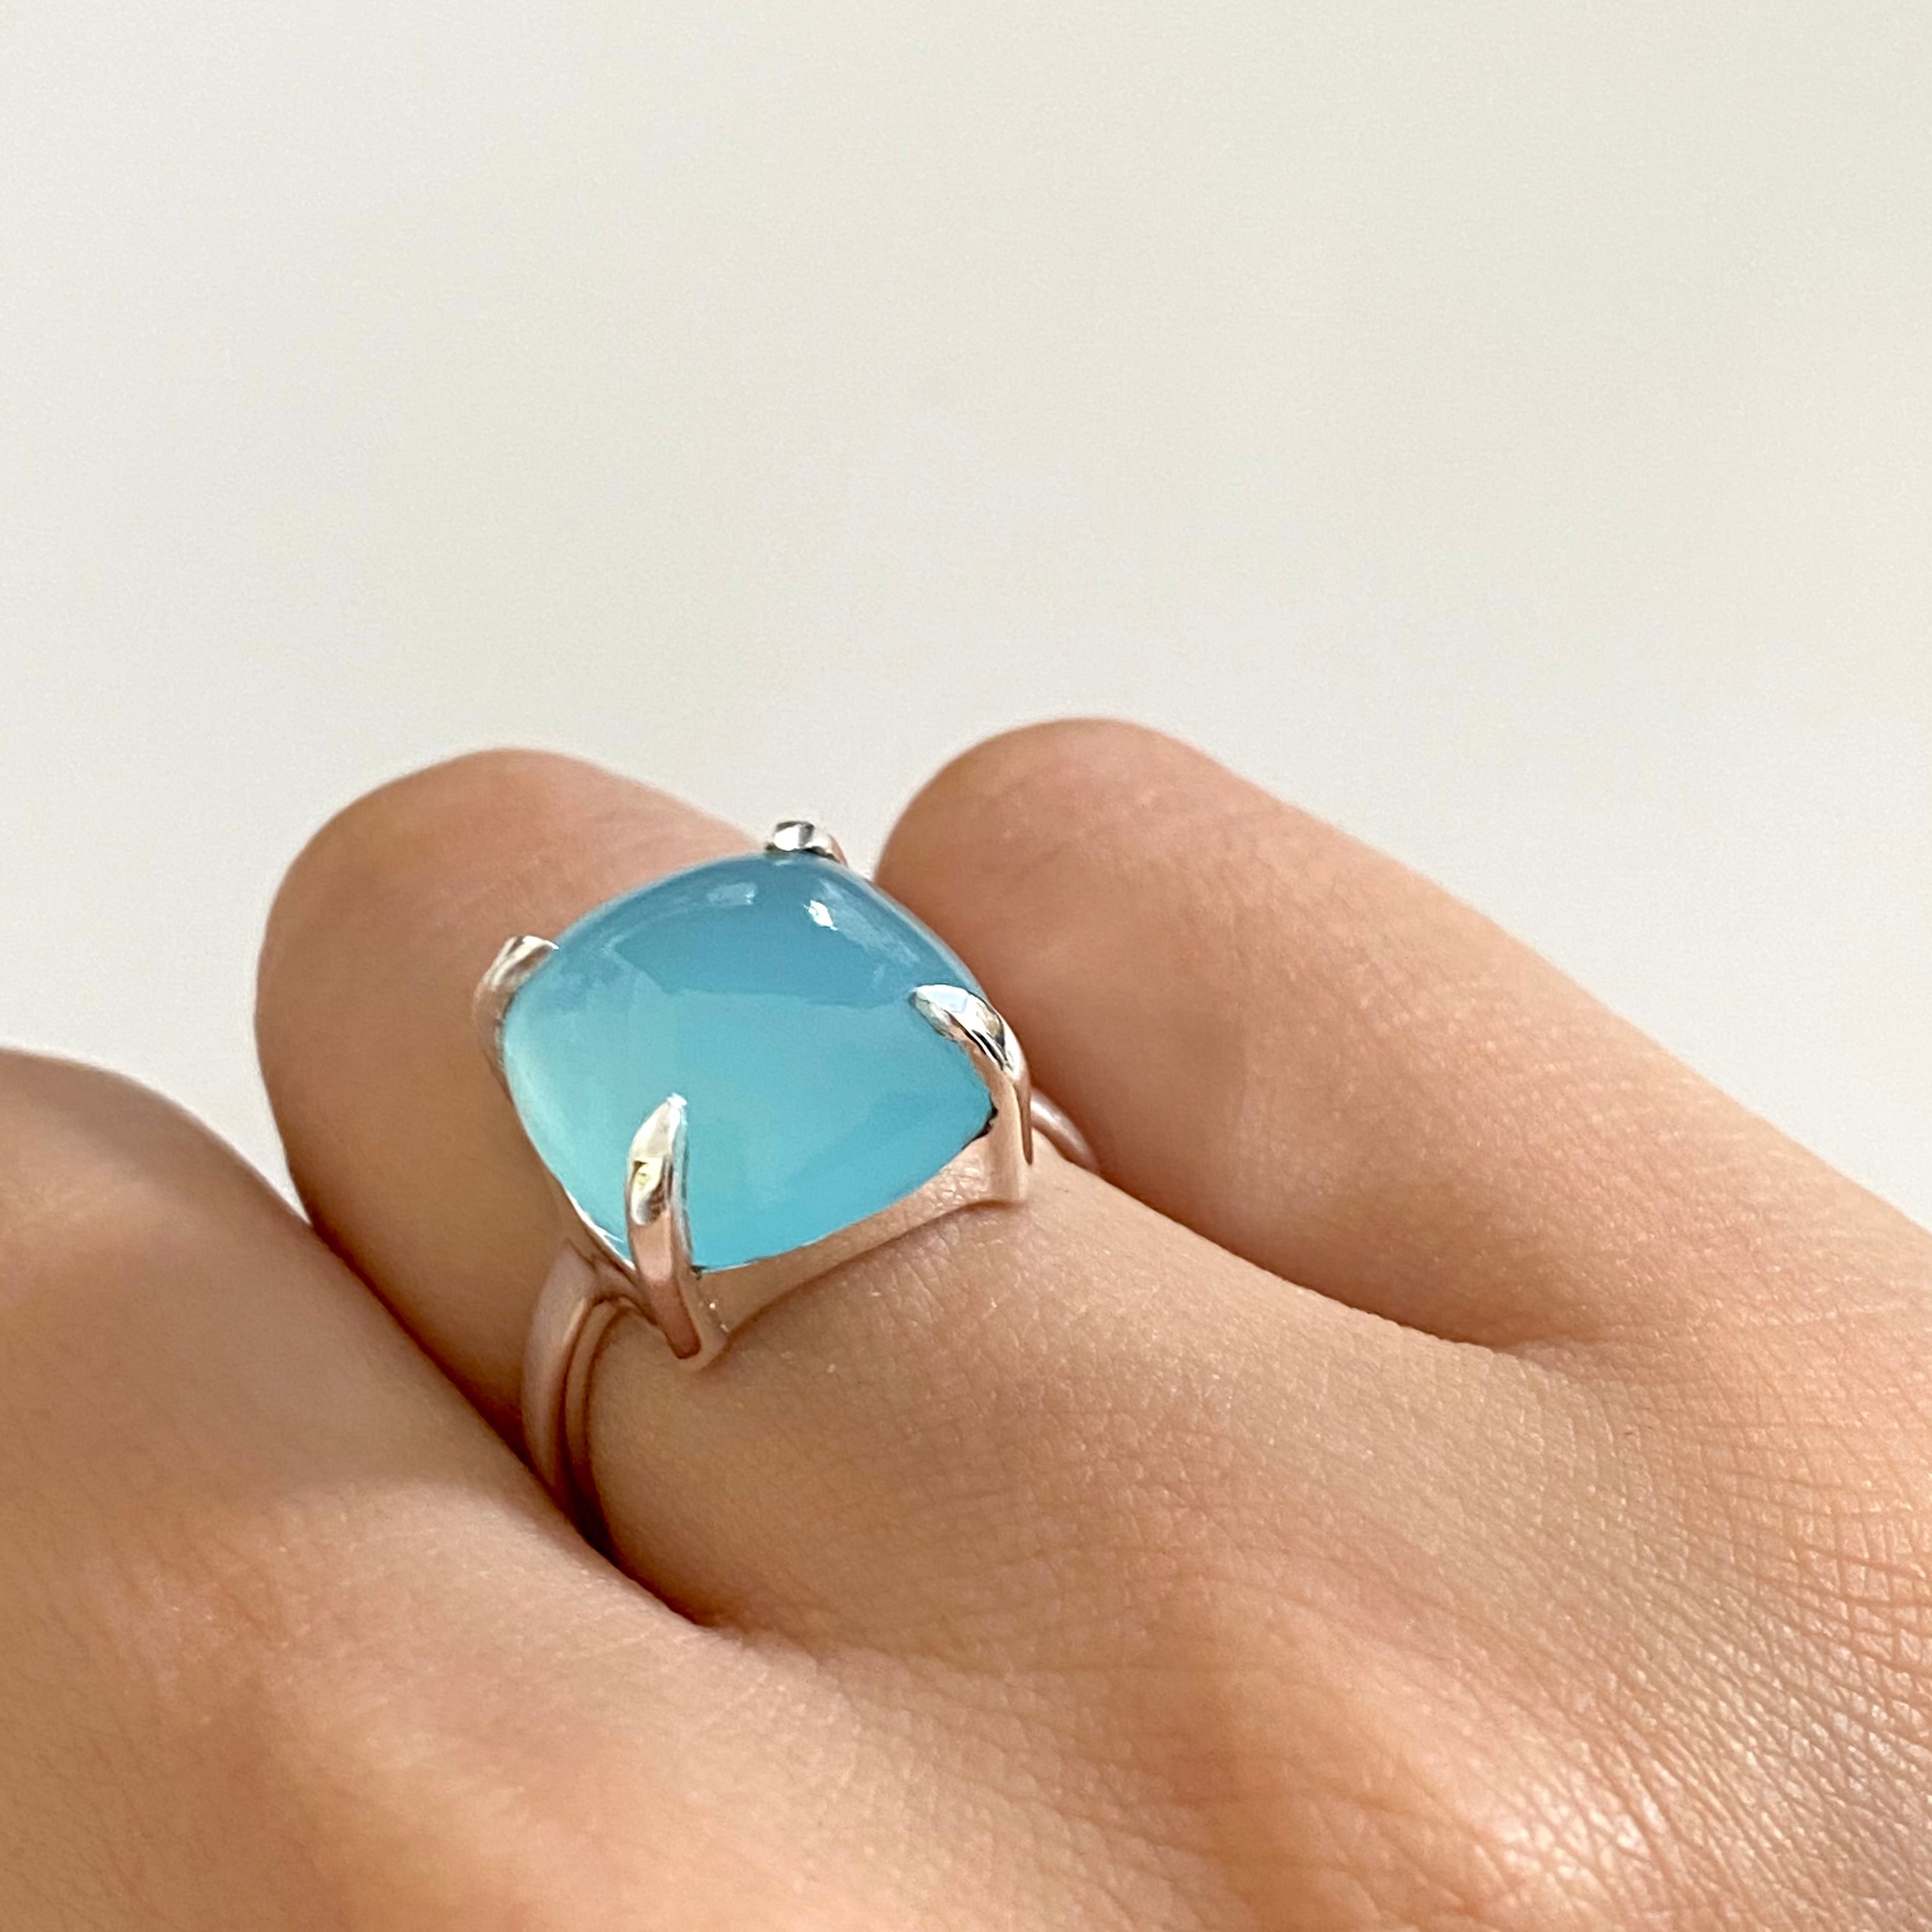 Square Cabochon Aqua Chalcedony Ring in Sterling Silver